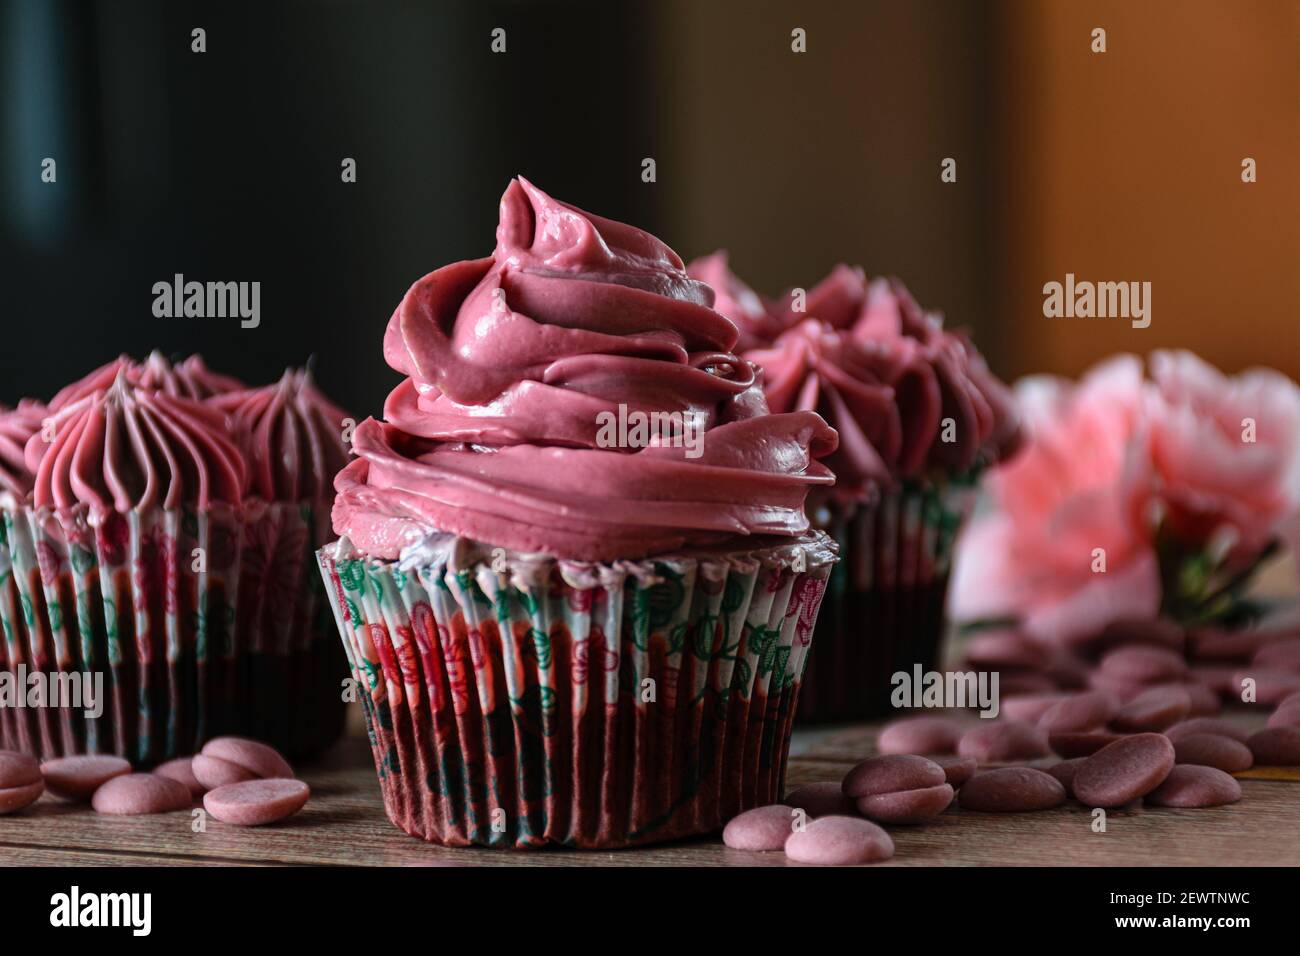 Closeup of three chocolate cupcakes with pink butter cream. Next to Ruby chocolate callets. Brown and orange background. Stock Photo